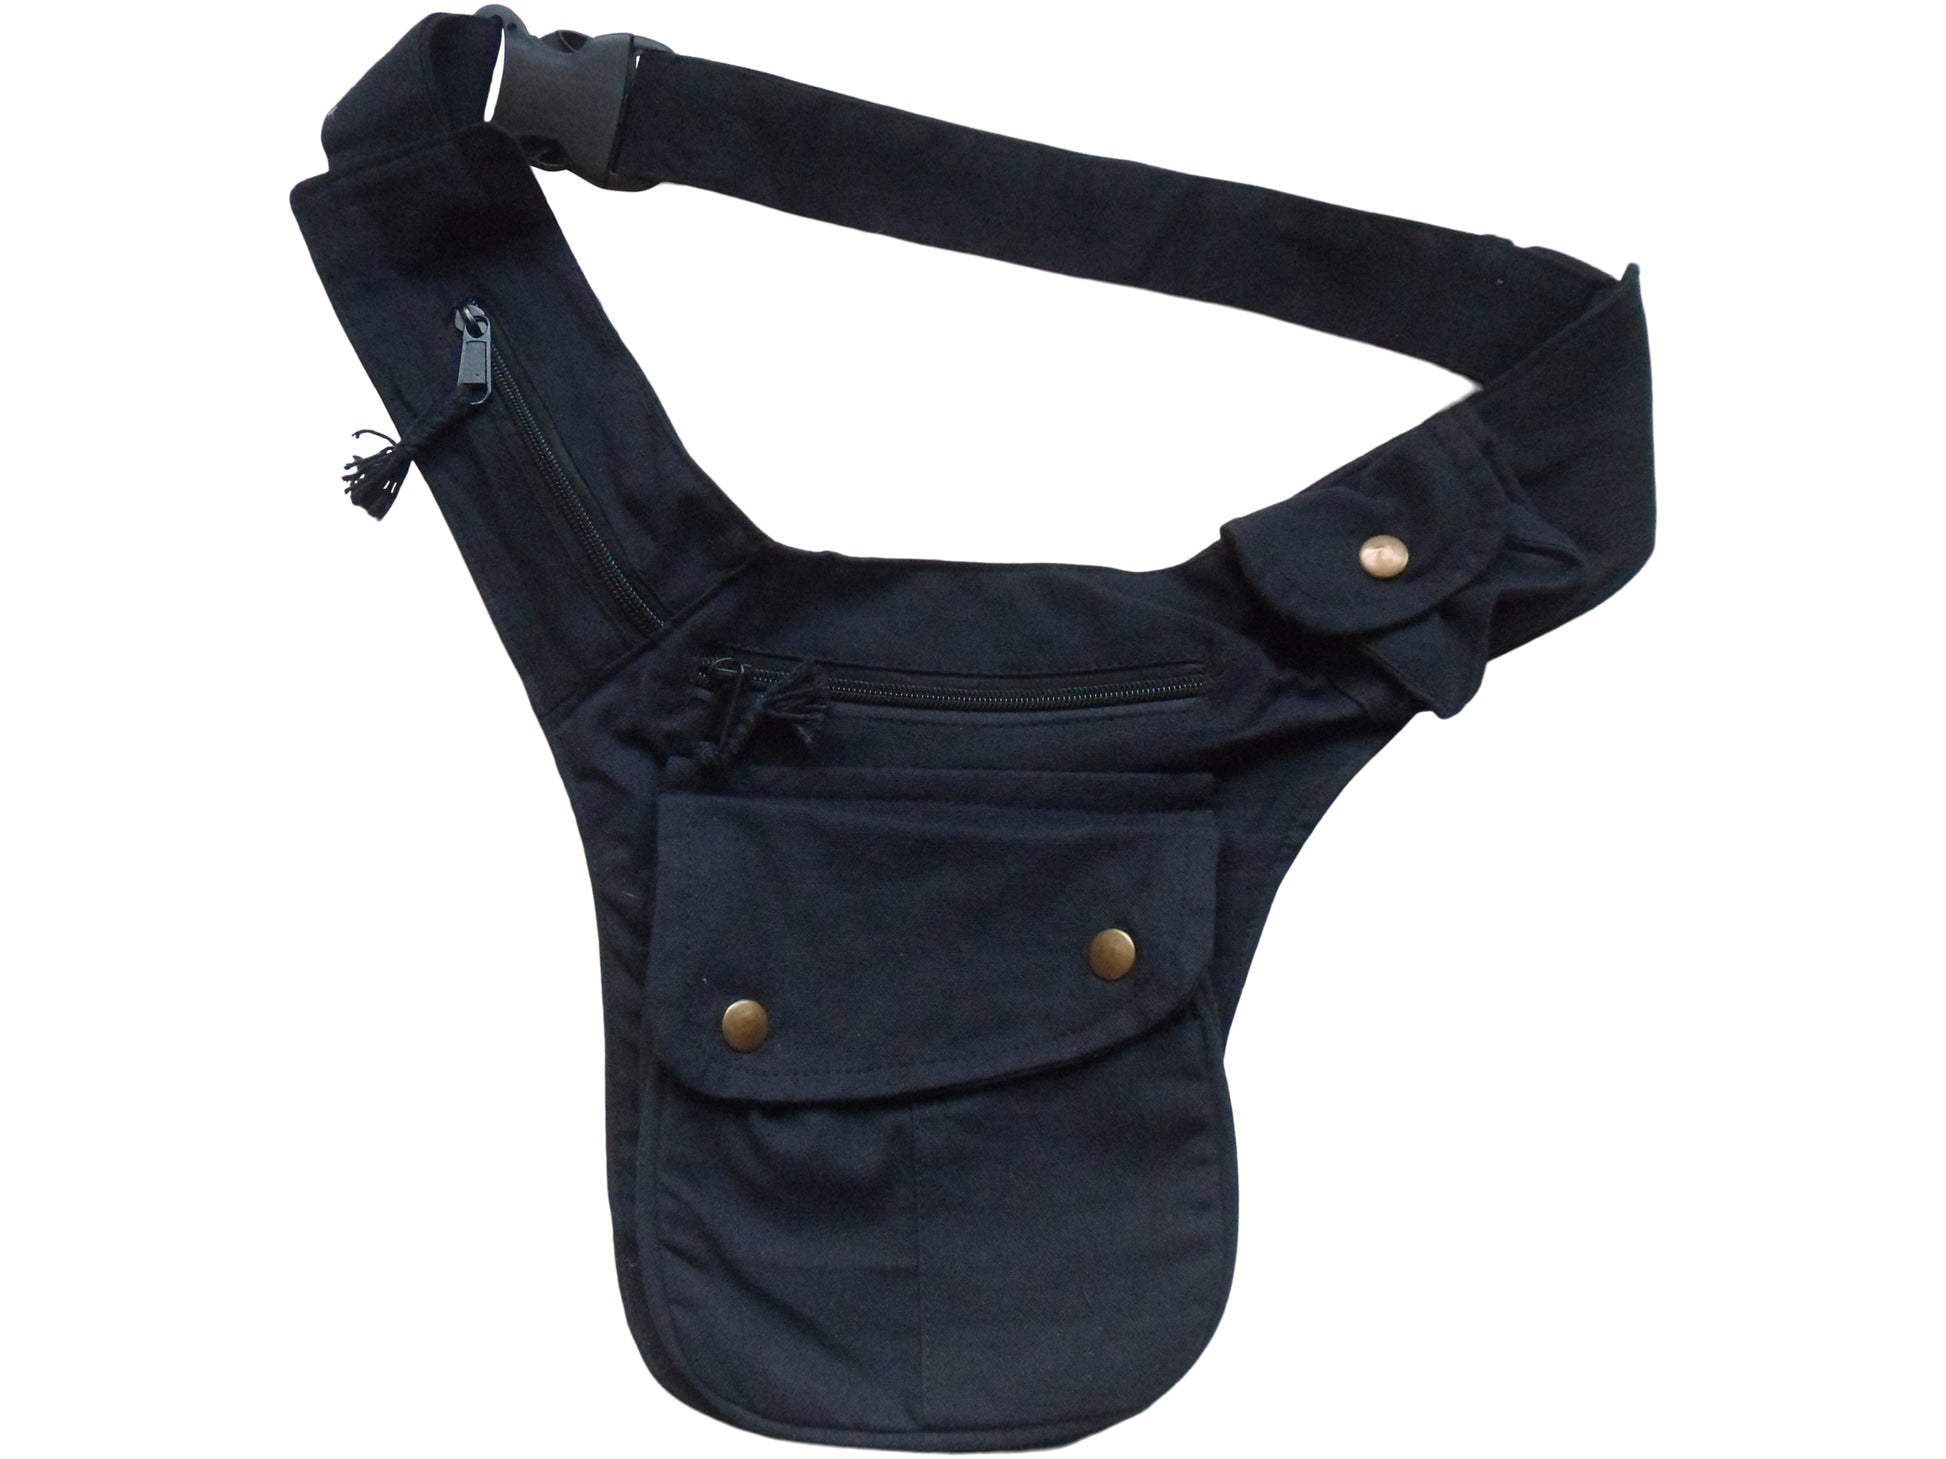 Main image – Handmade Black Utility Belt with adjustable waist strap. 100% good quality heavy duty cotton & 1/2 lined pockets. 7 pockets in total with either zip or press stud fastenings. Great for Outdoor Events, Festivals, Fishing, Tourism & Travel.